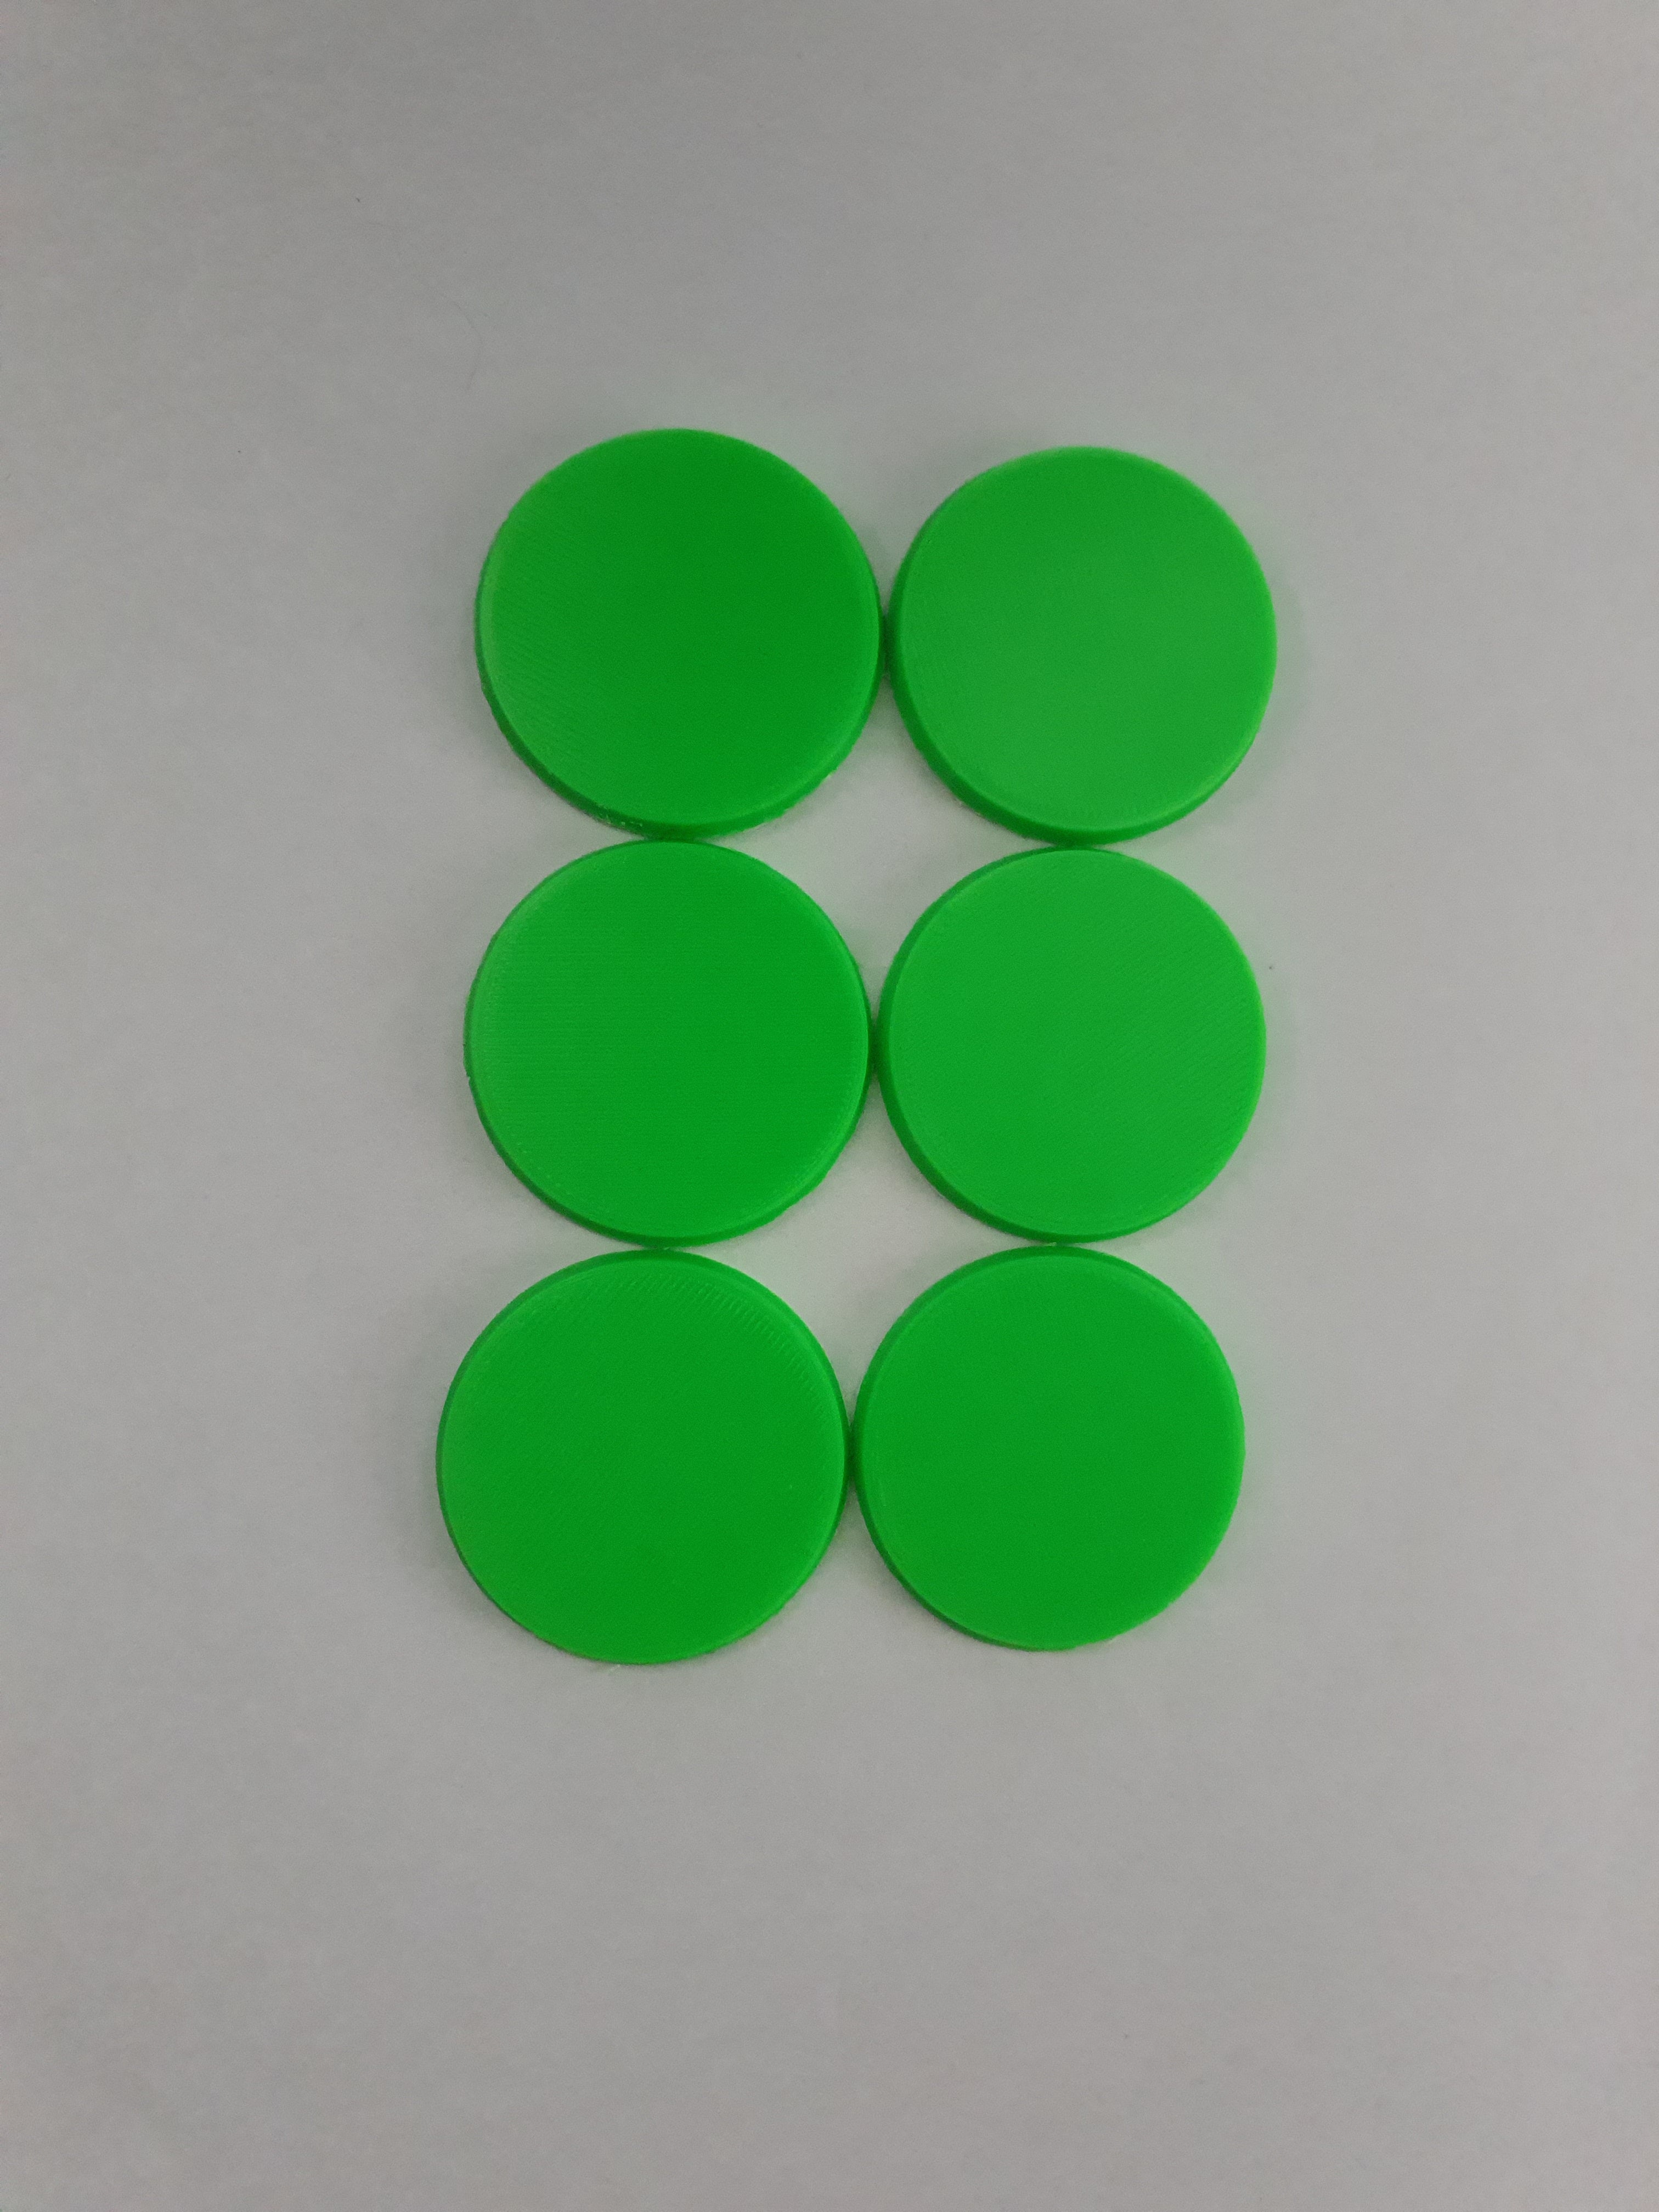 A Pack of 6x 40mm x 40mm Round Base | Cracking-Singles